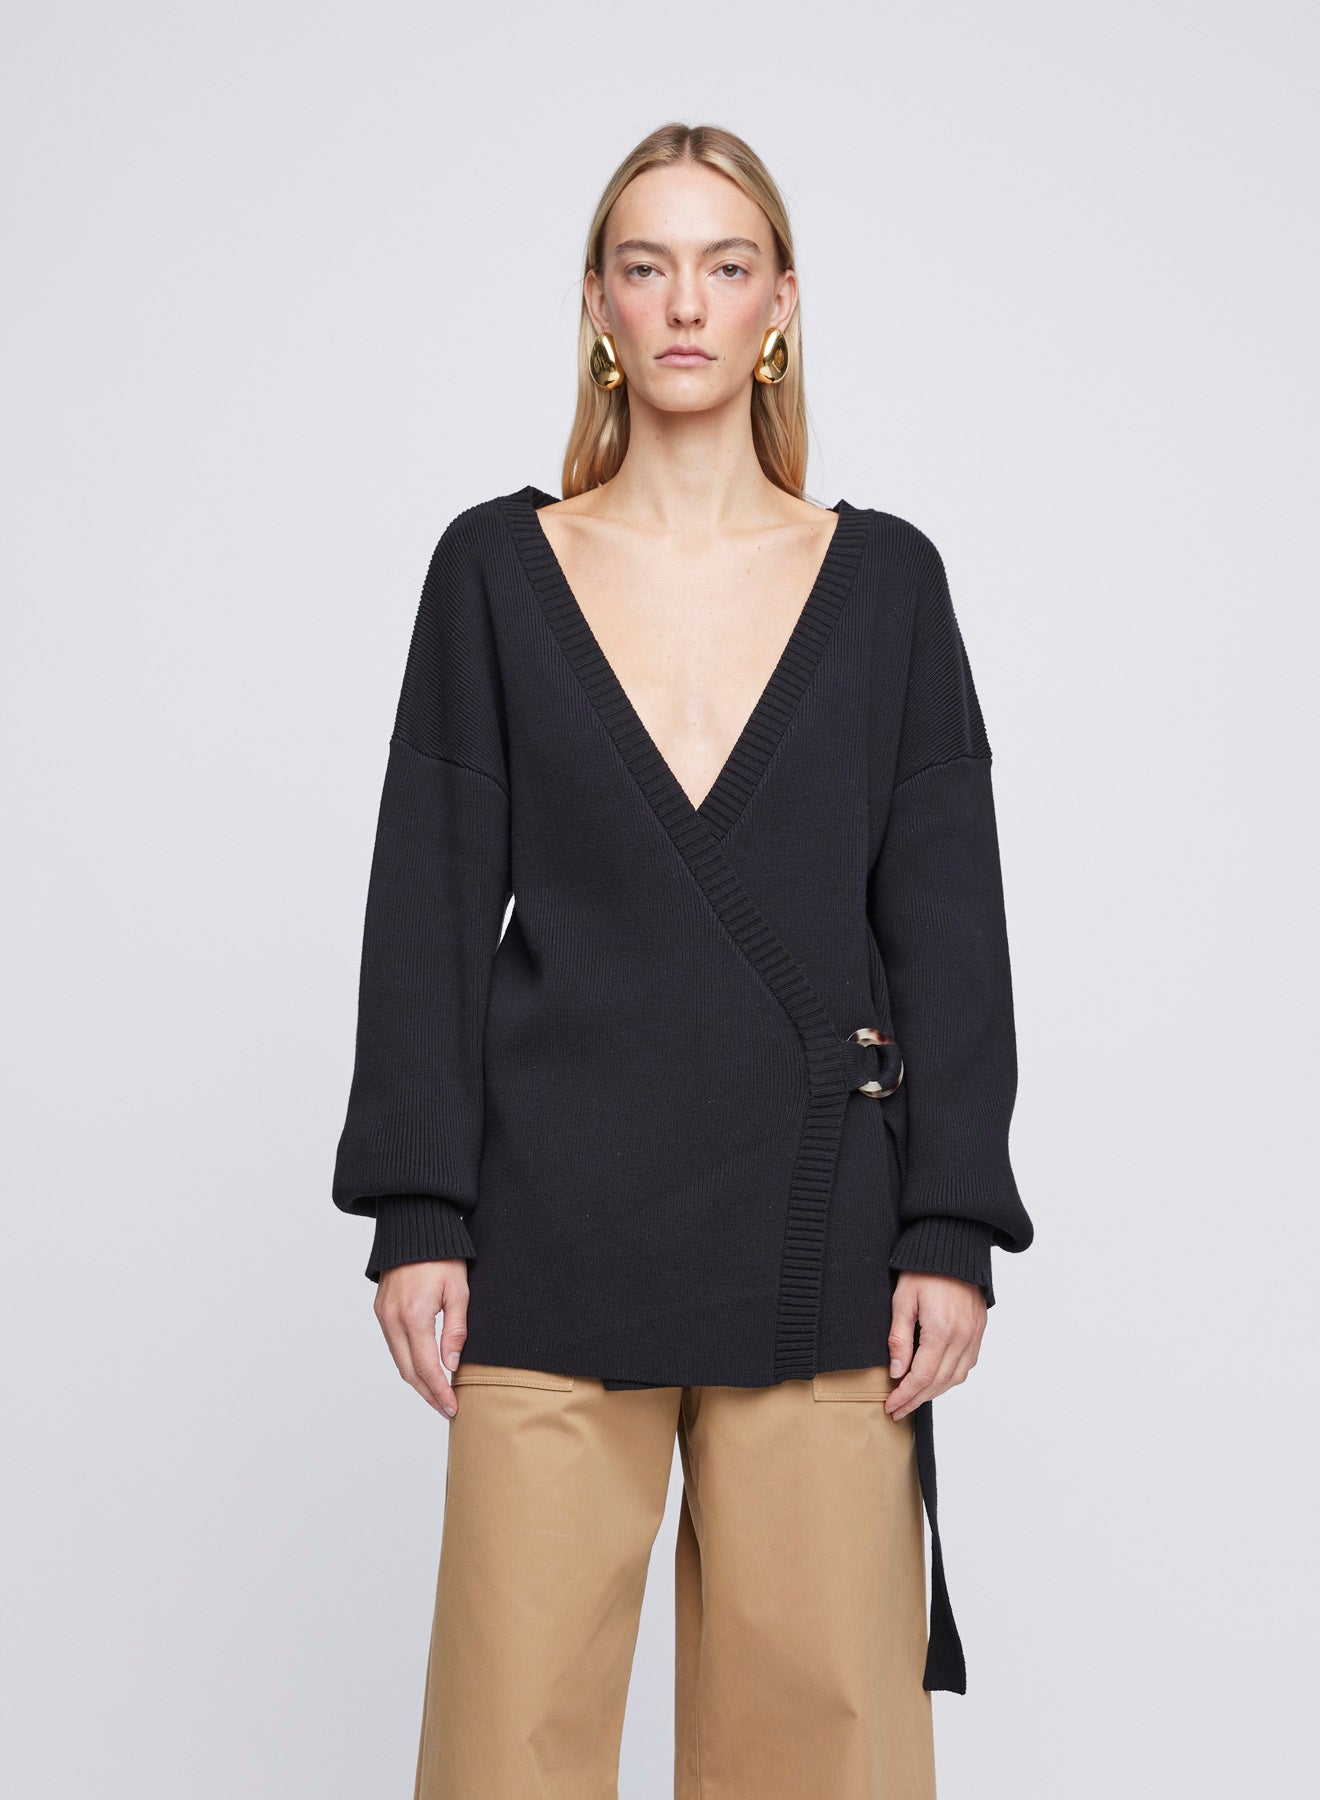 The ANNA QUAN Bridget Cardigan in Raven is a classic long sleeve knitted cardigan with a belt closure and deep v cut neckline.